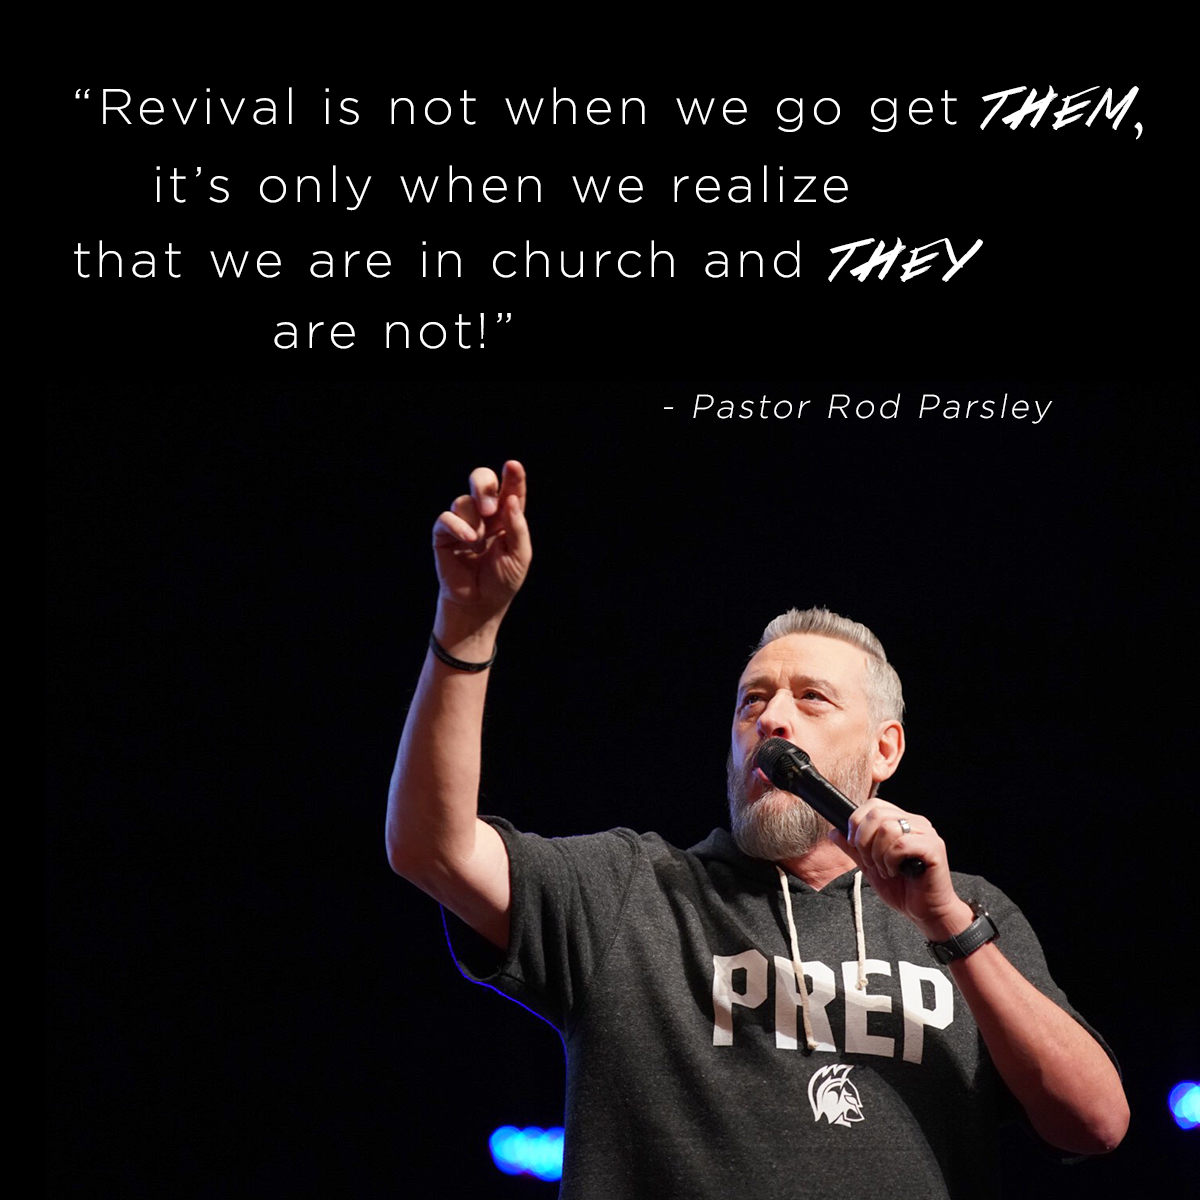 “Revival is not when we go get them, it’s only when we realize that we are in church and they are not!” – Pastor Rod Parsley